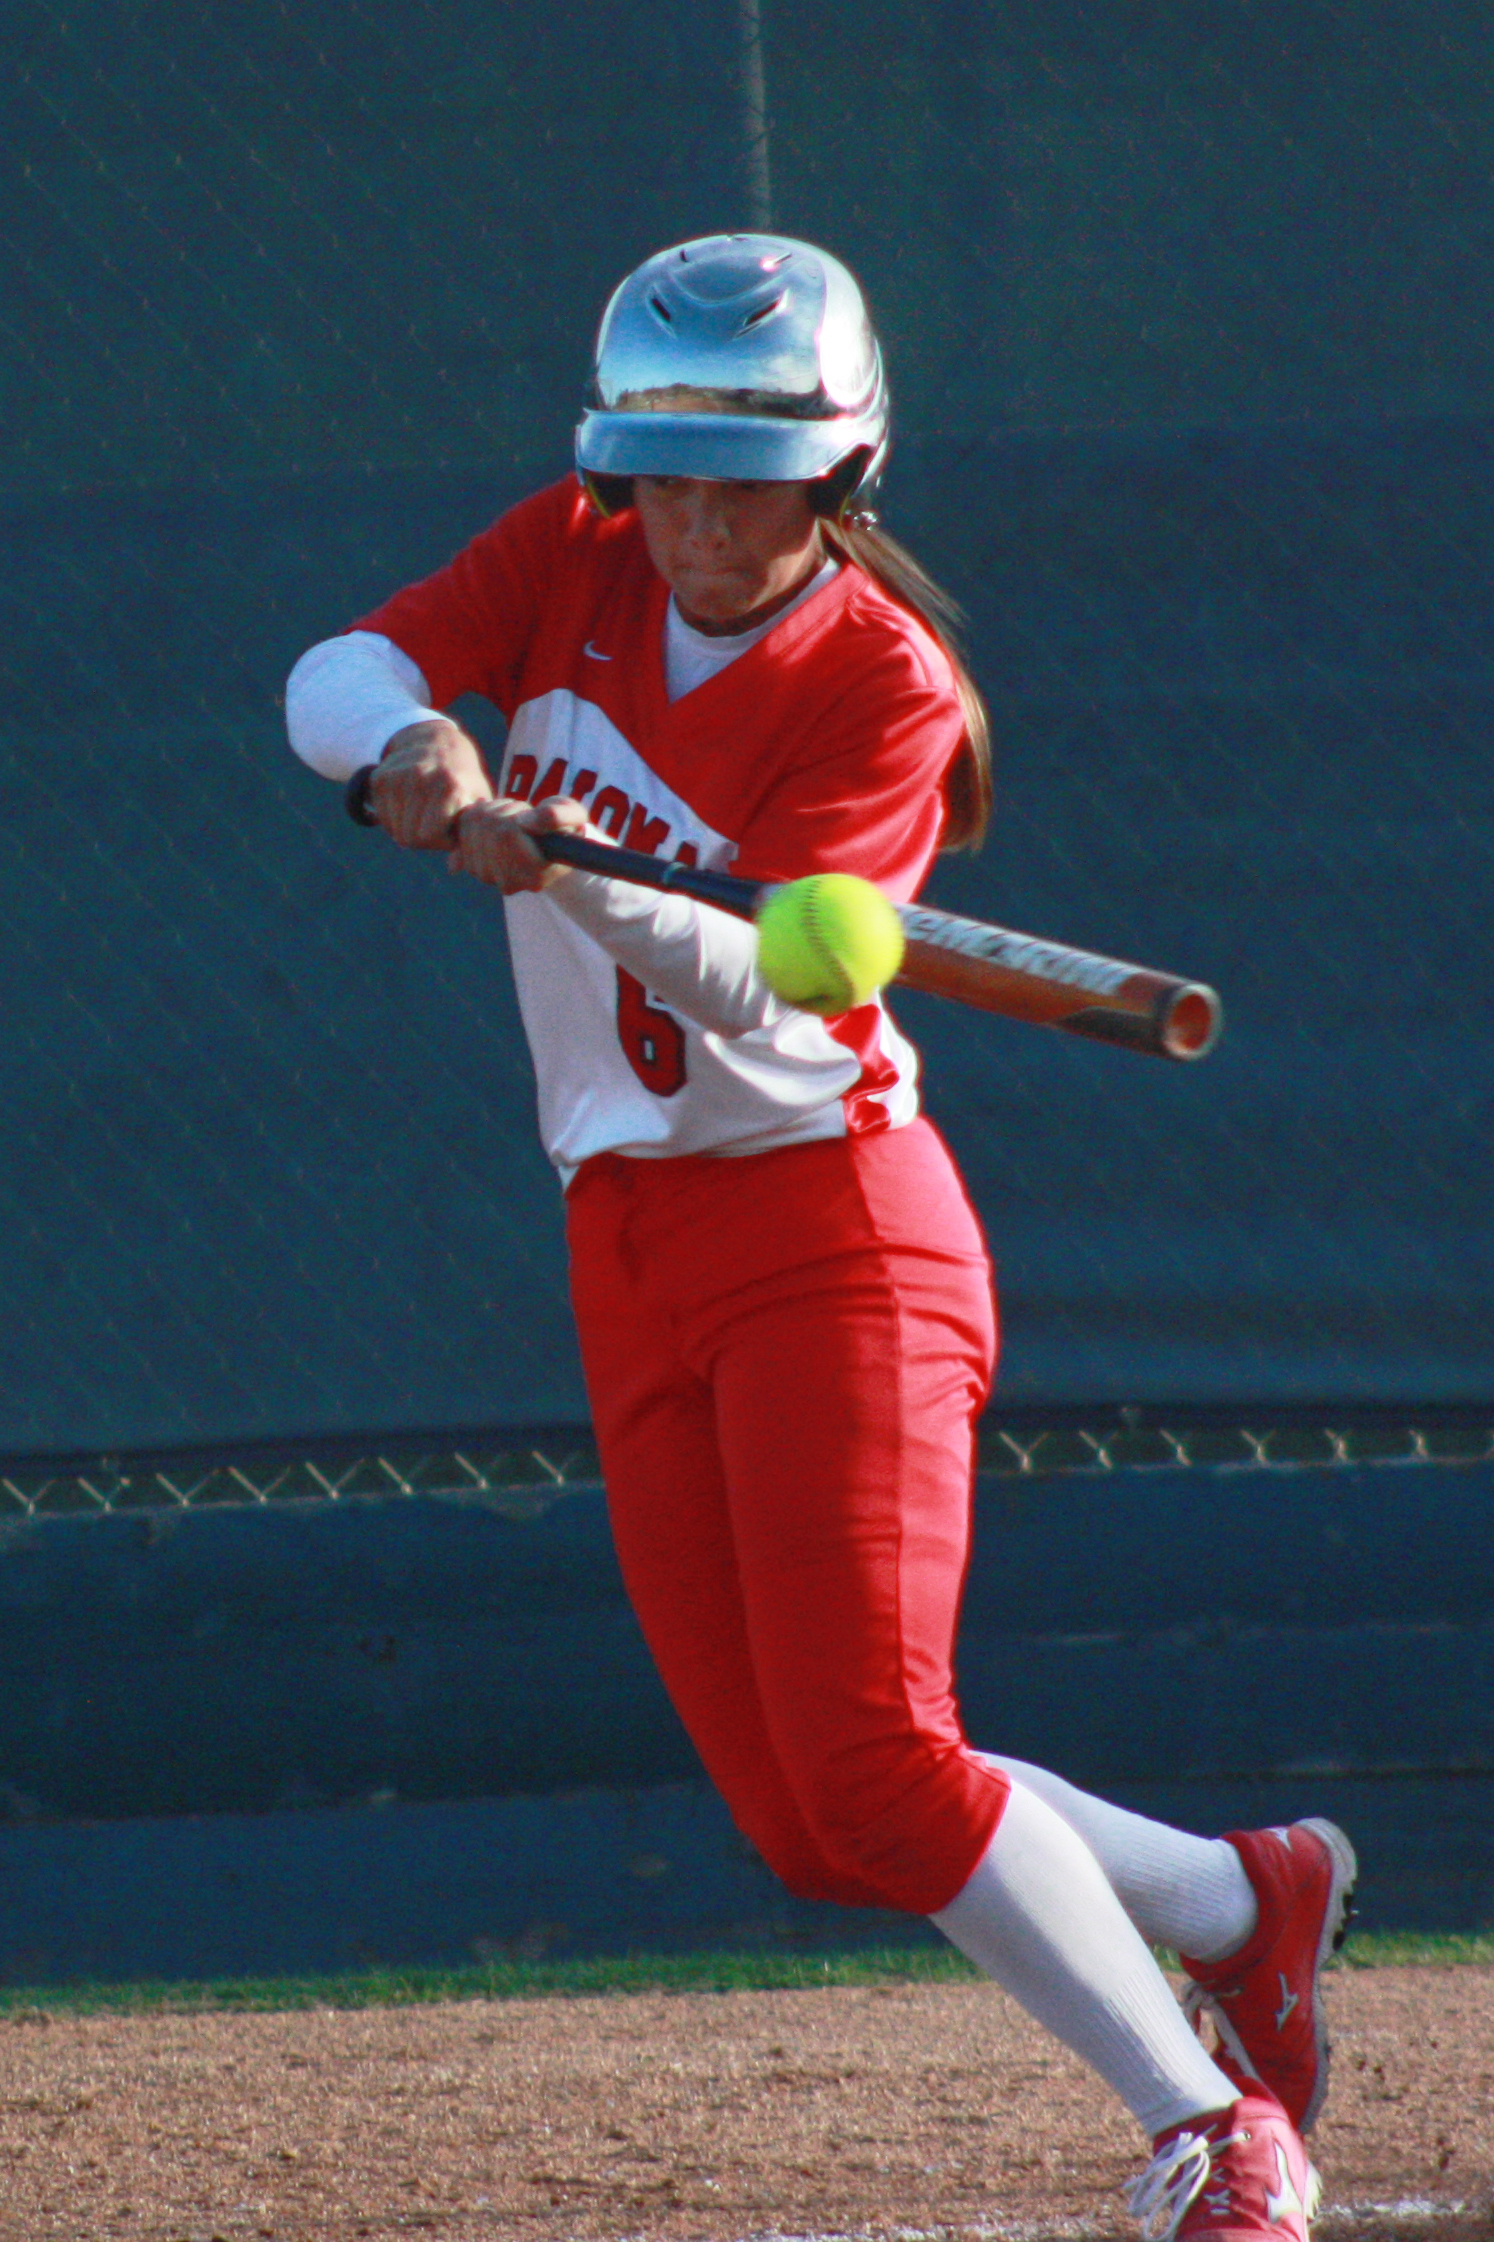 Palomar outfielder Kristen George hits an RBI double to drive in Keilani âKKâ Fronda in the 4th inning to put Palomar up 4-1 against Citrus College on Feb 25 at Palomarâs softball field. The Comets picked up their 8th win in a row to improve their record to 9-1 on the season in their 4-1 win over the Owls. Scott Colson/The Telescope